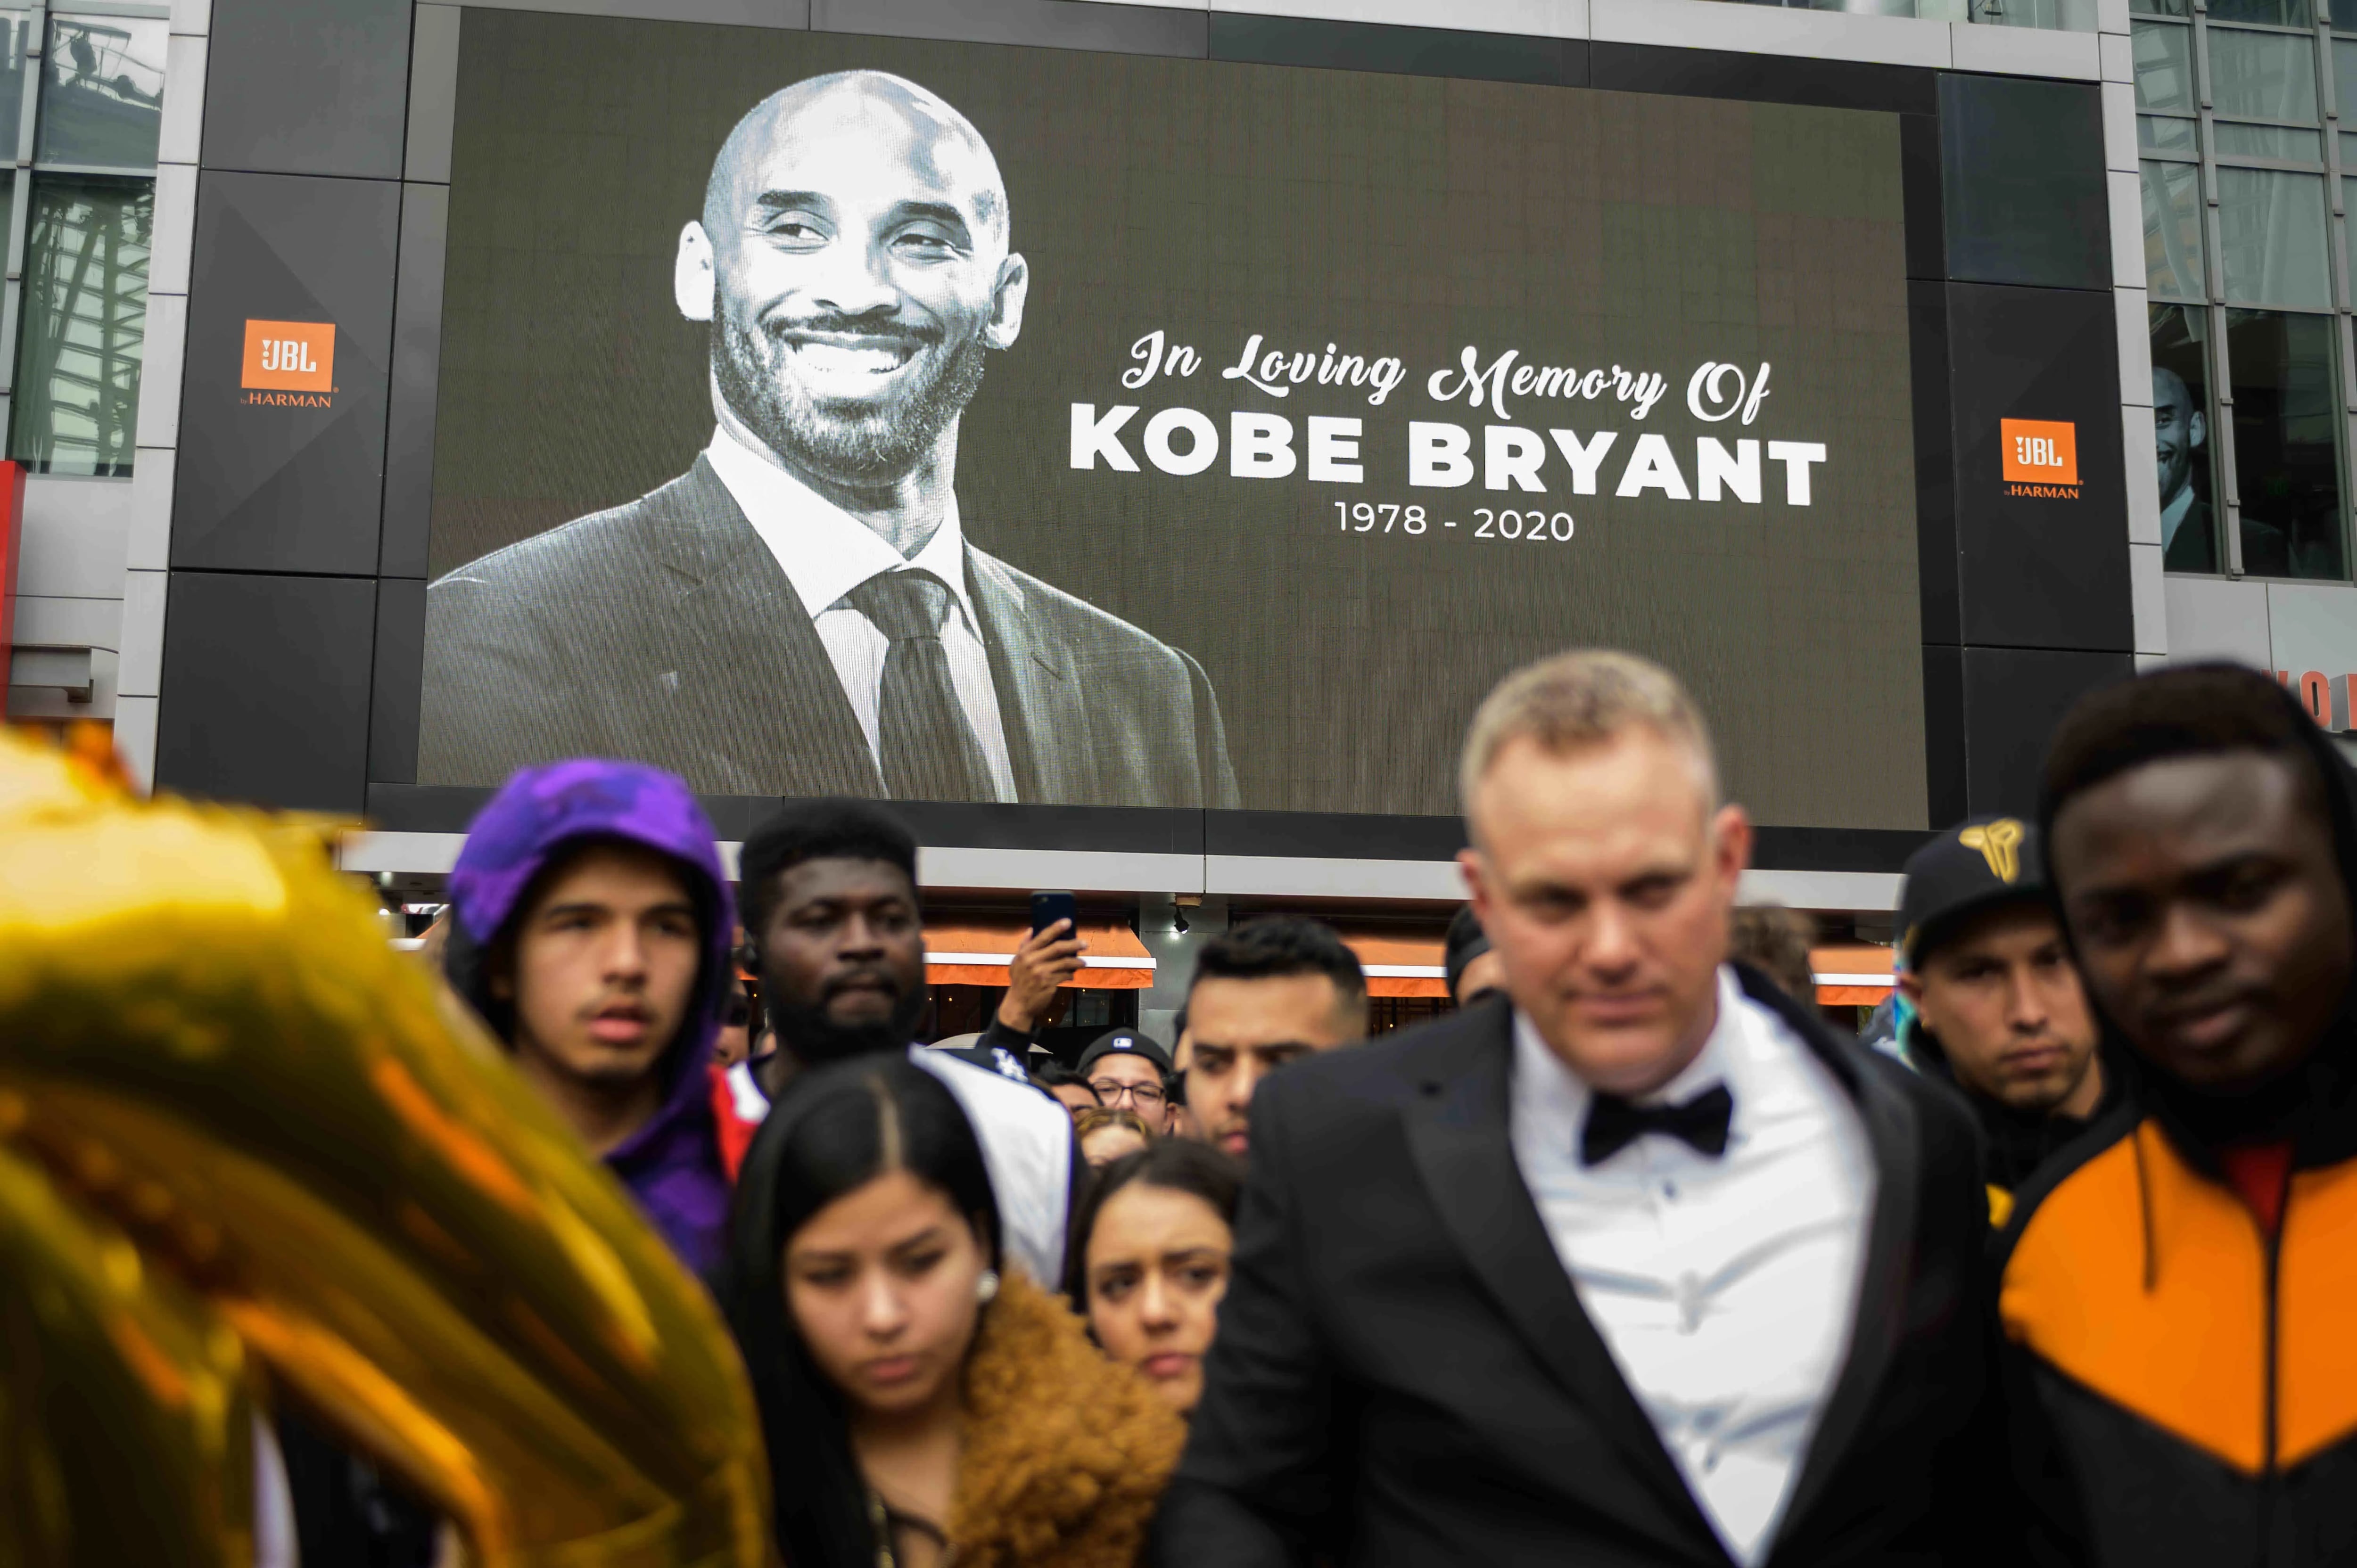 Kobe Bryant, 1978-2020: Coverage from The Athletic - The Athletic